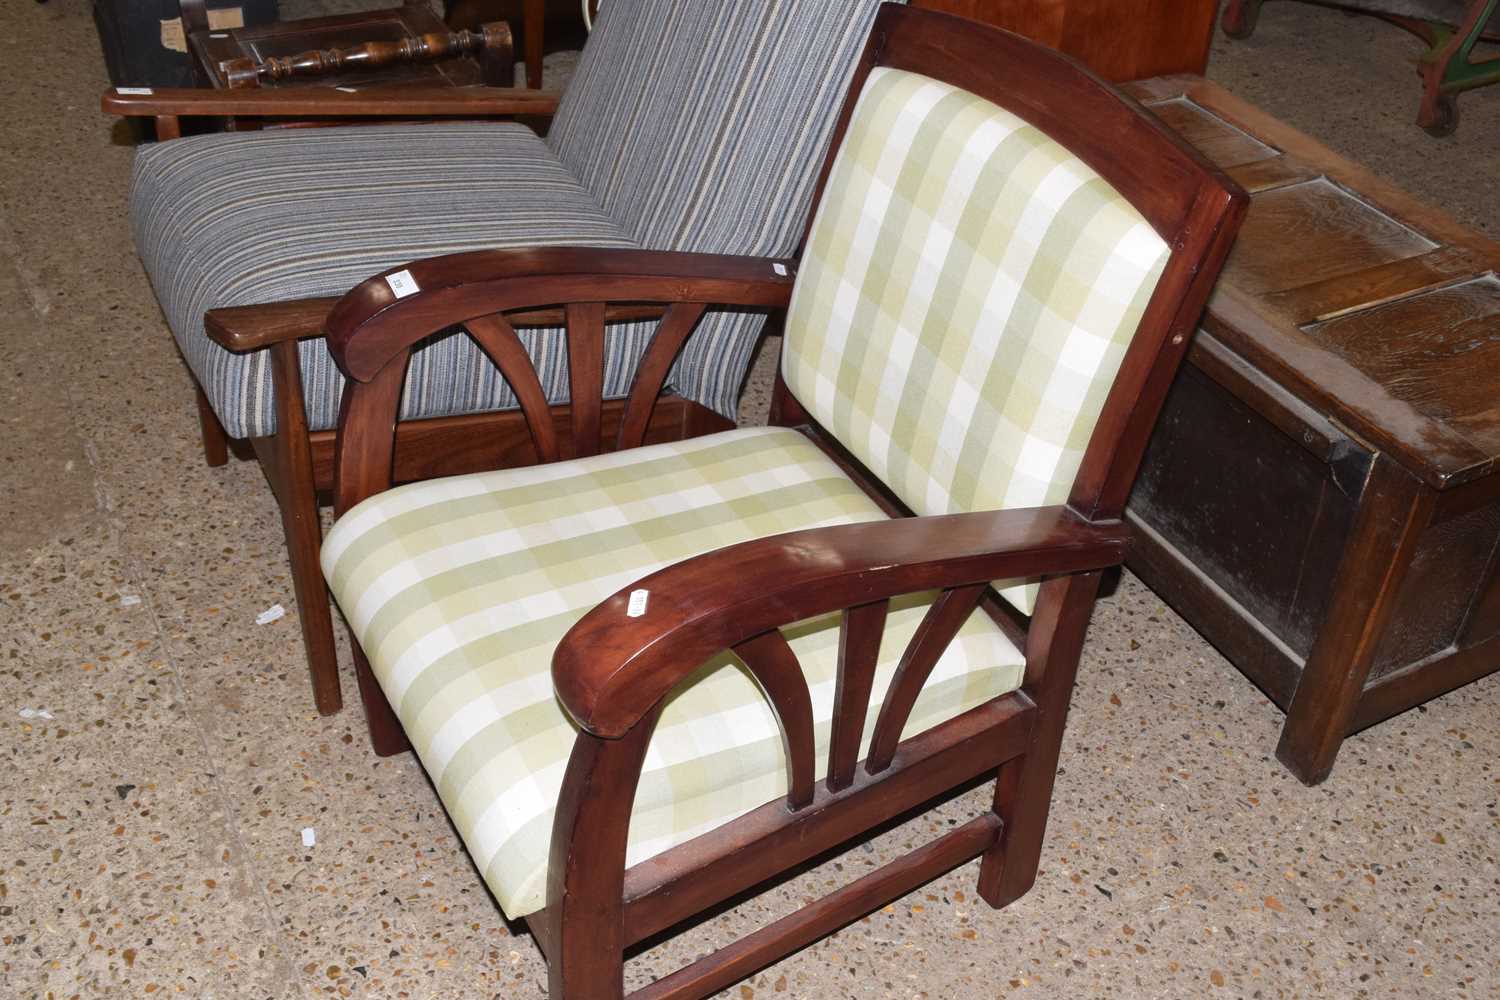 Early 20th Century hardwood framed armchair with chequered upholstery